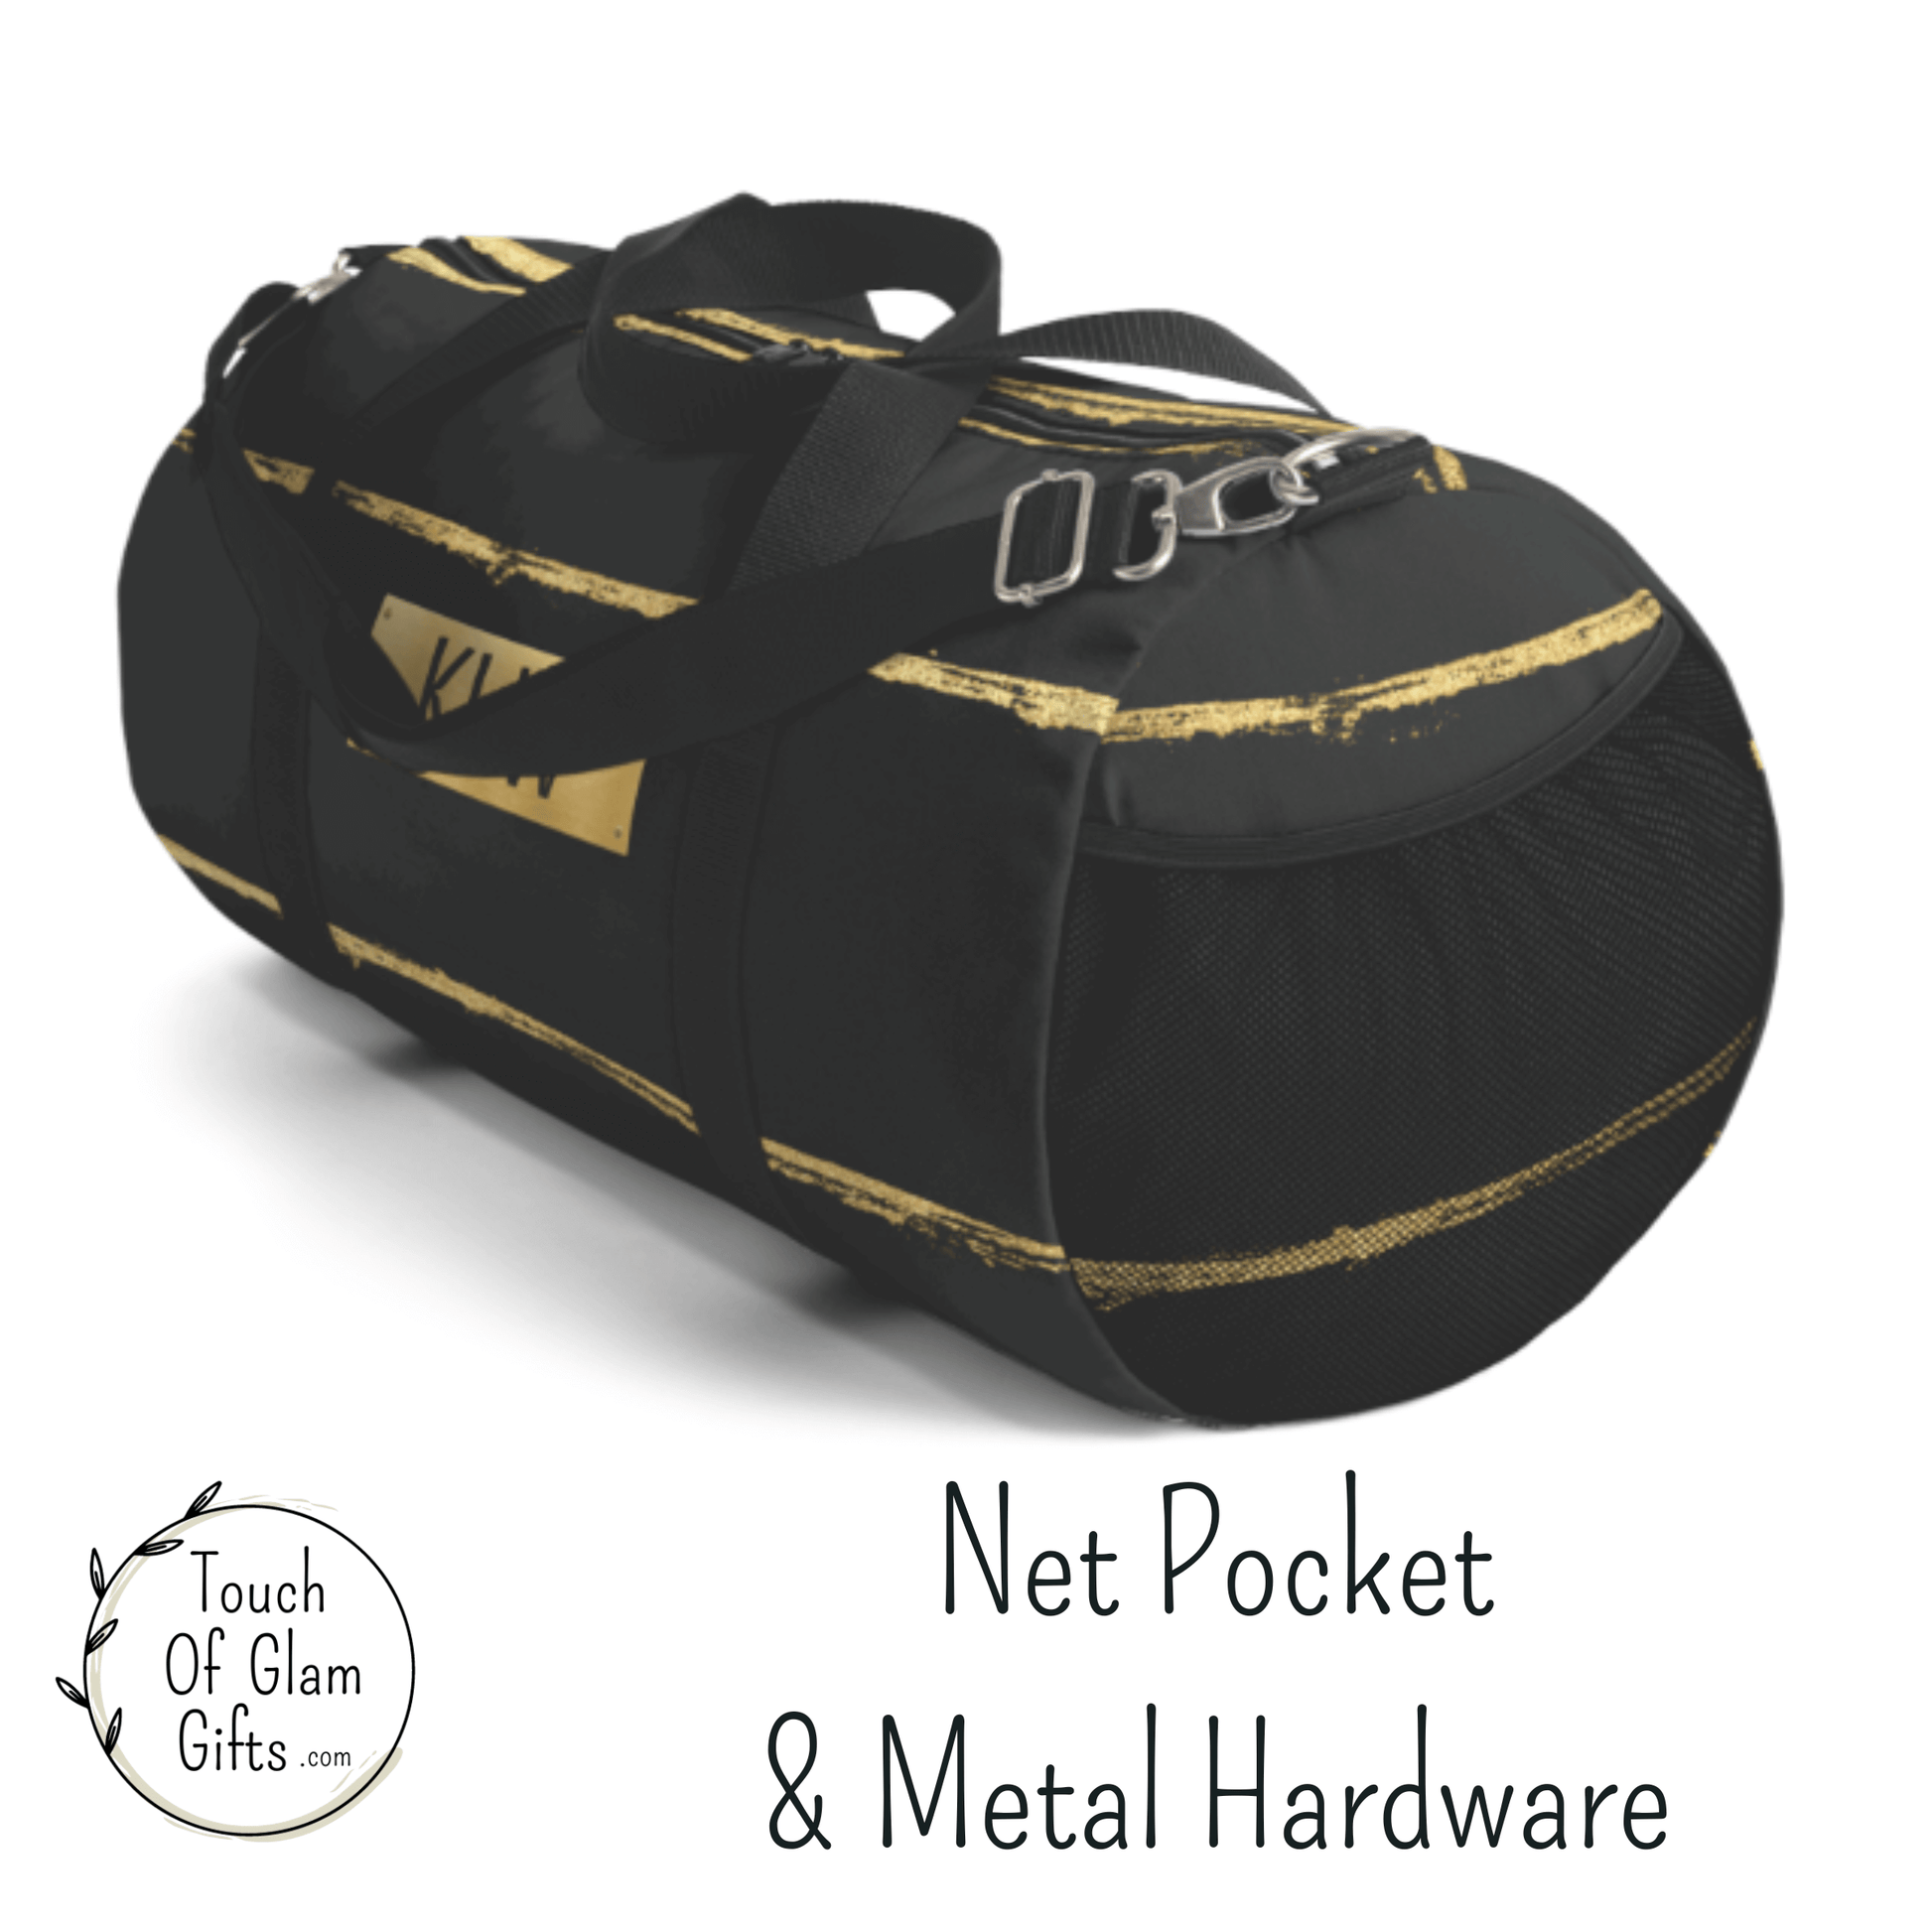 This view of our mens custom duffel bag shows the net exterior pocket for additional storage. The personalized duffel bag is custom made upon your order.